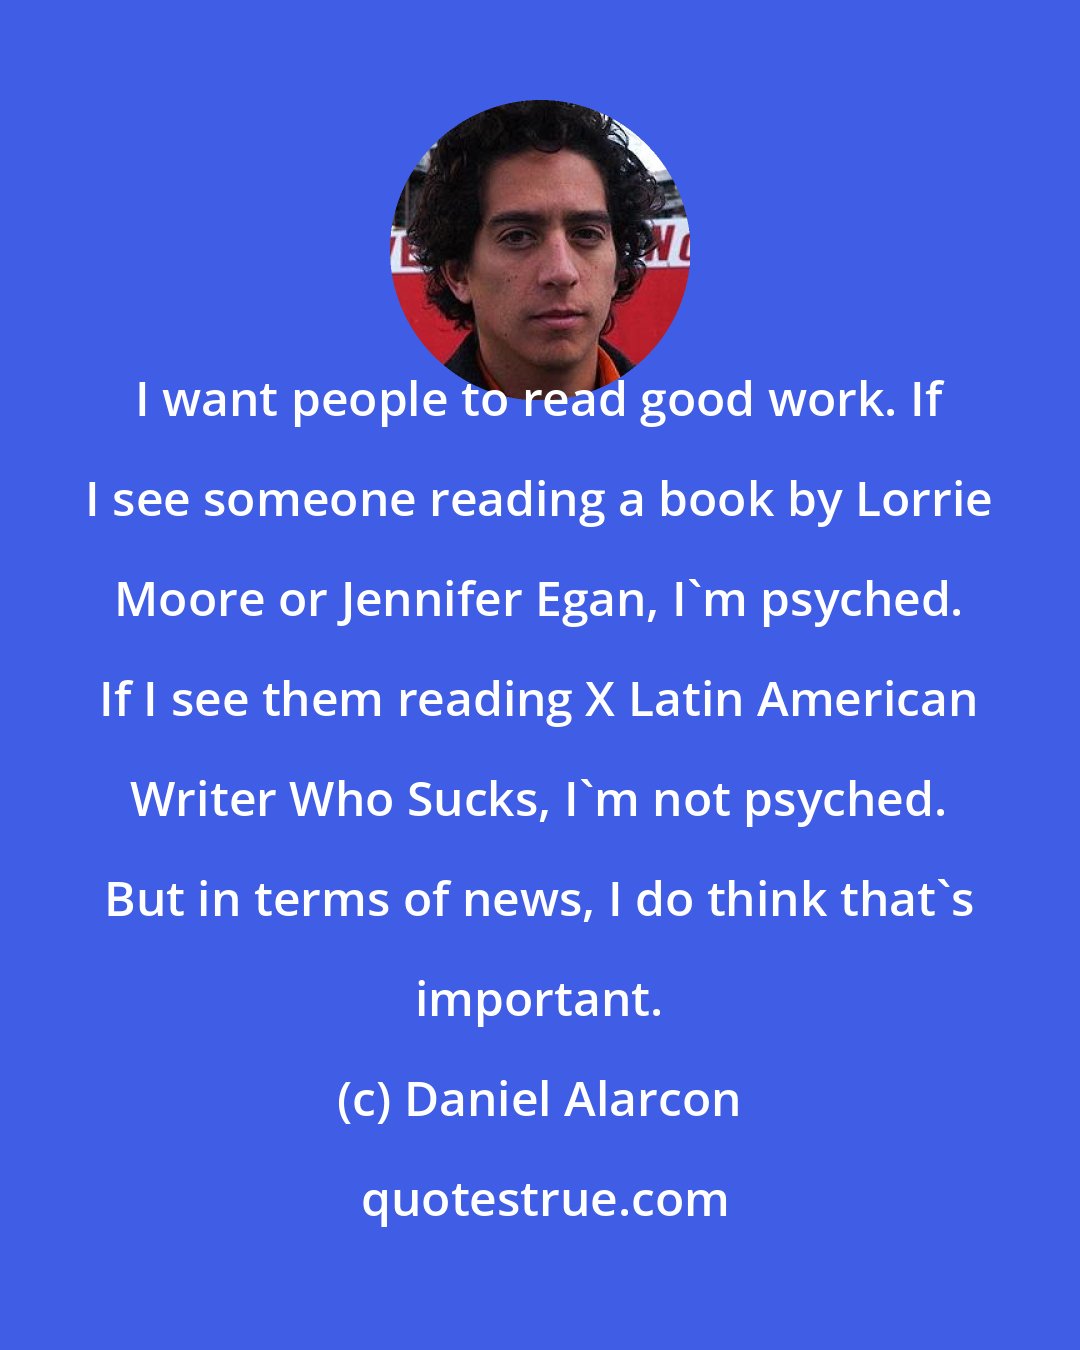 Daniel Alarcon: I want people to read good work. If I see someone reading a book by Lorrie Moore or Jennifer Egan, I'm psyched. If I see them reading X Latin American Writer Who Sucks, I'm not psyched. But in terms of news, I do think that's important.